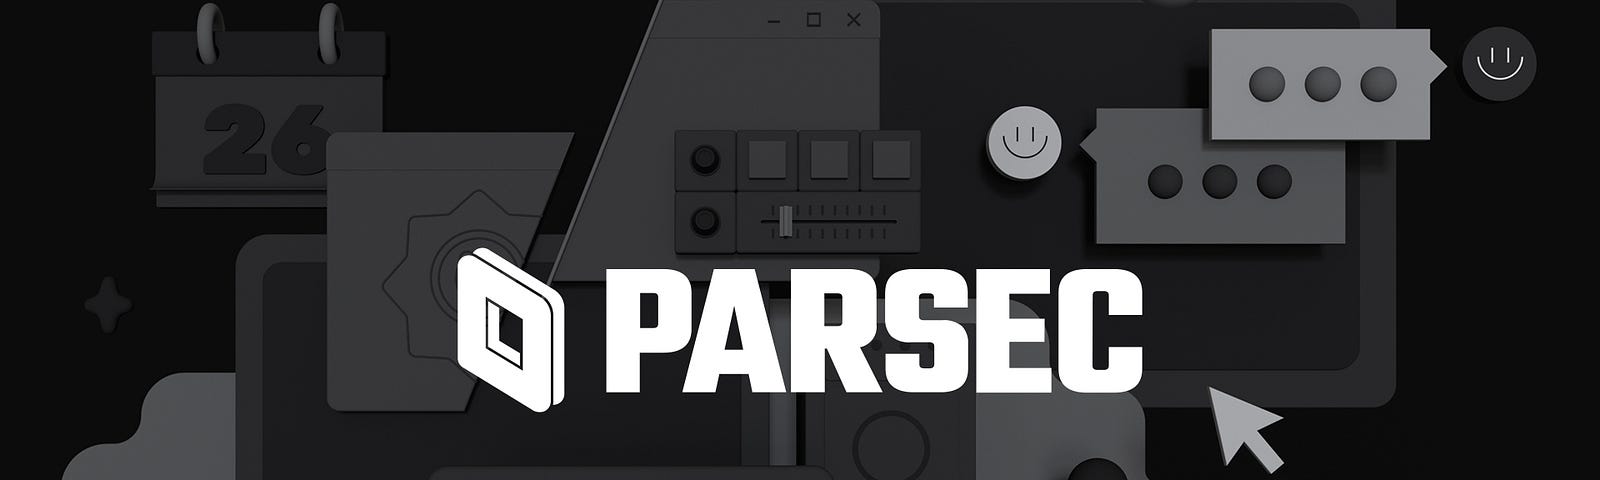 Parsec for Teams and Enterprise support artists and animators working remotely.